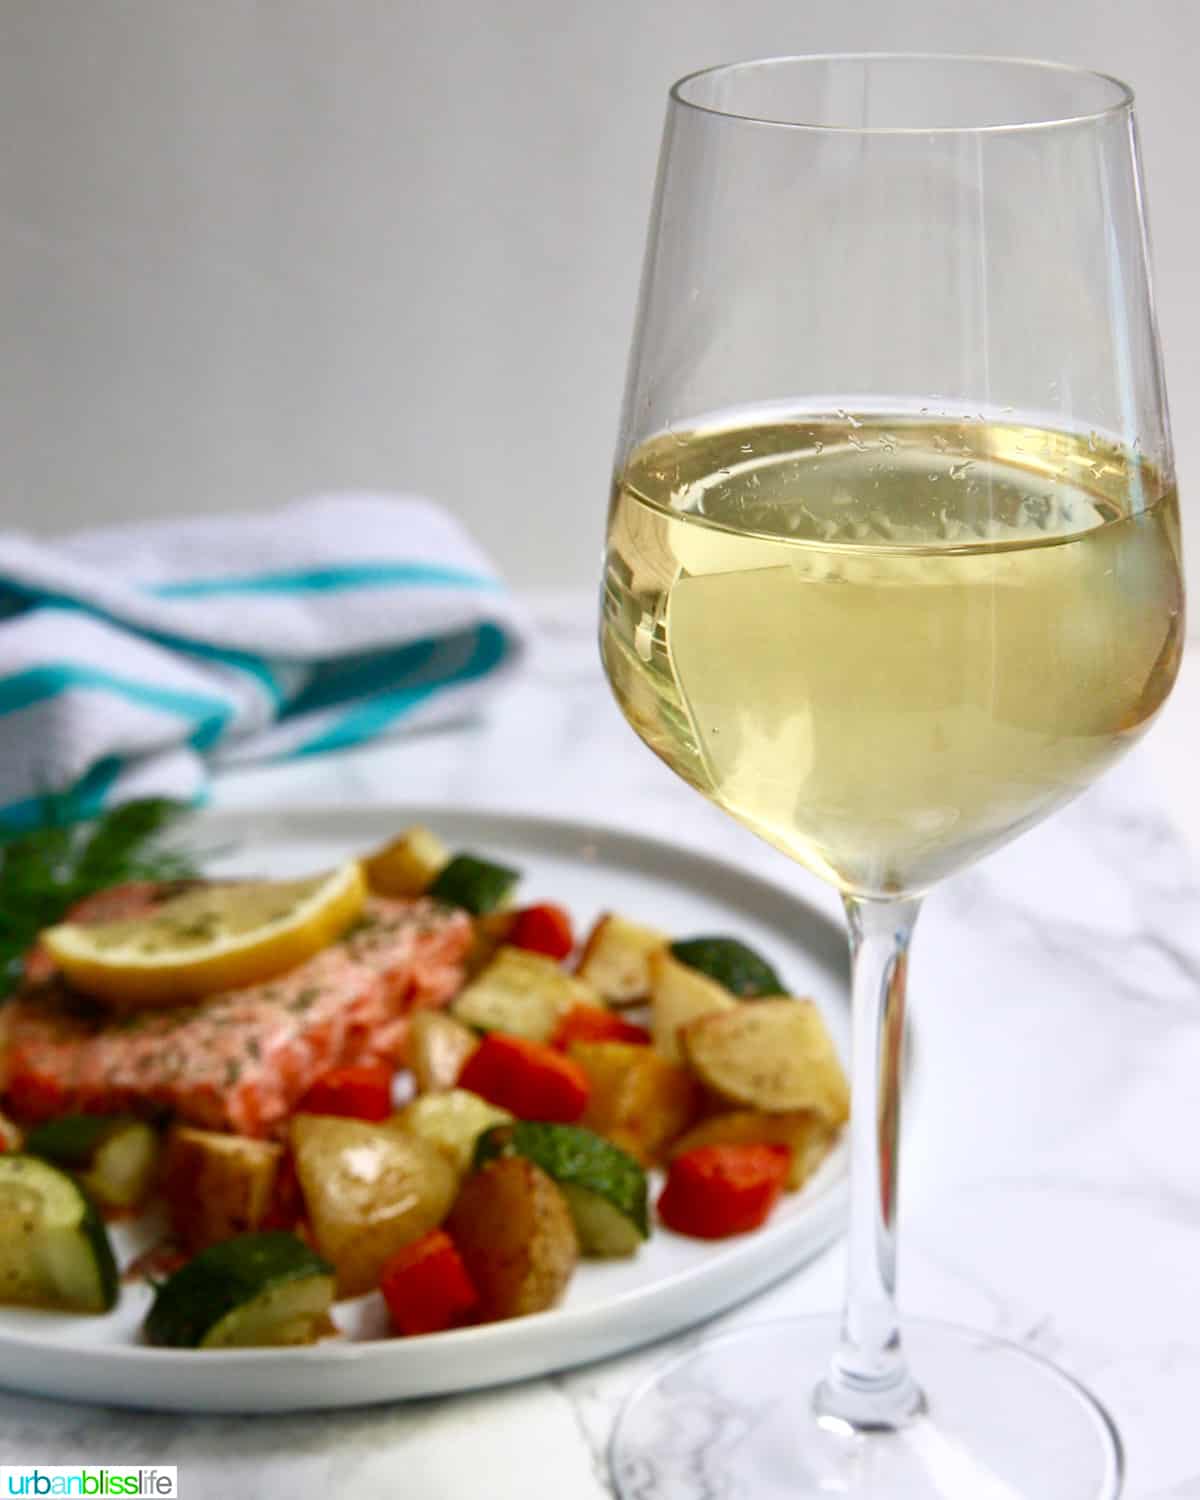 glass of white wine with salmon and vegetables in the background.